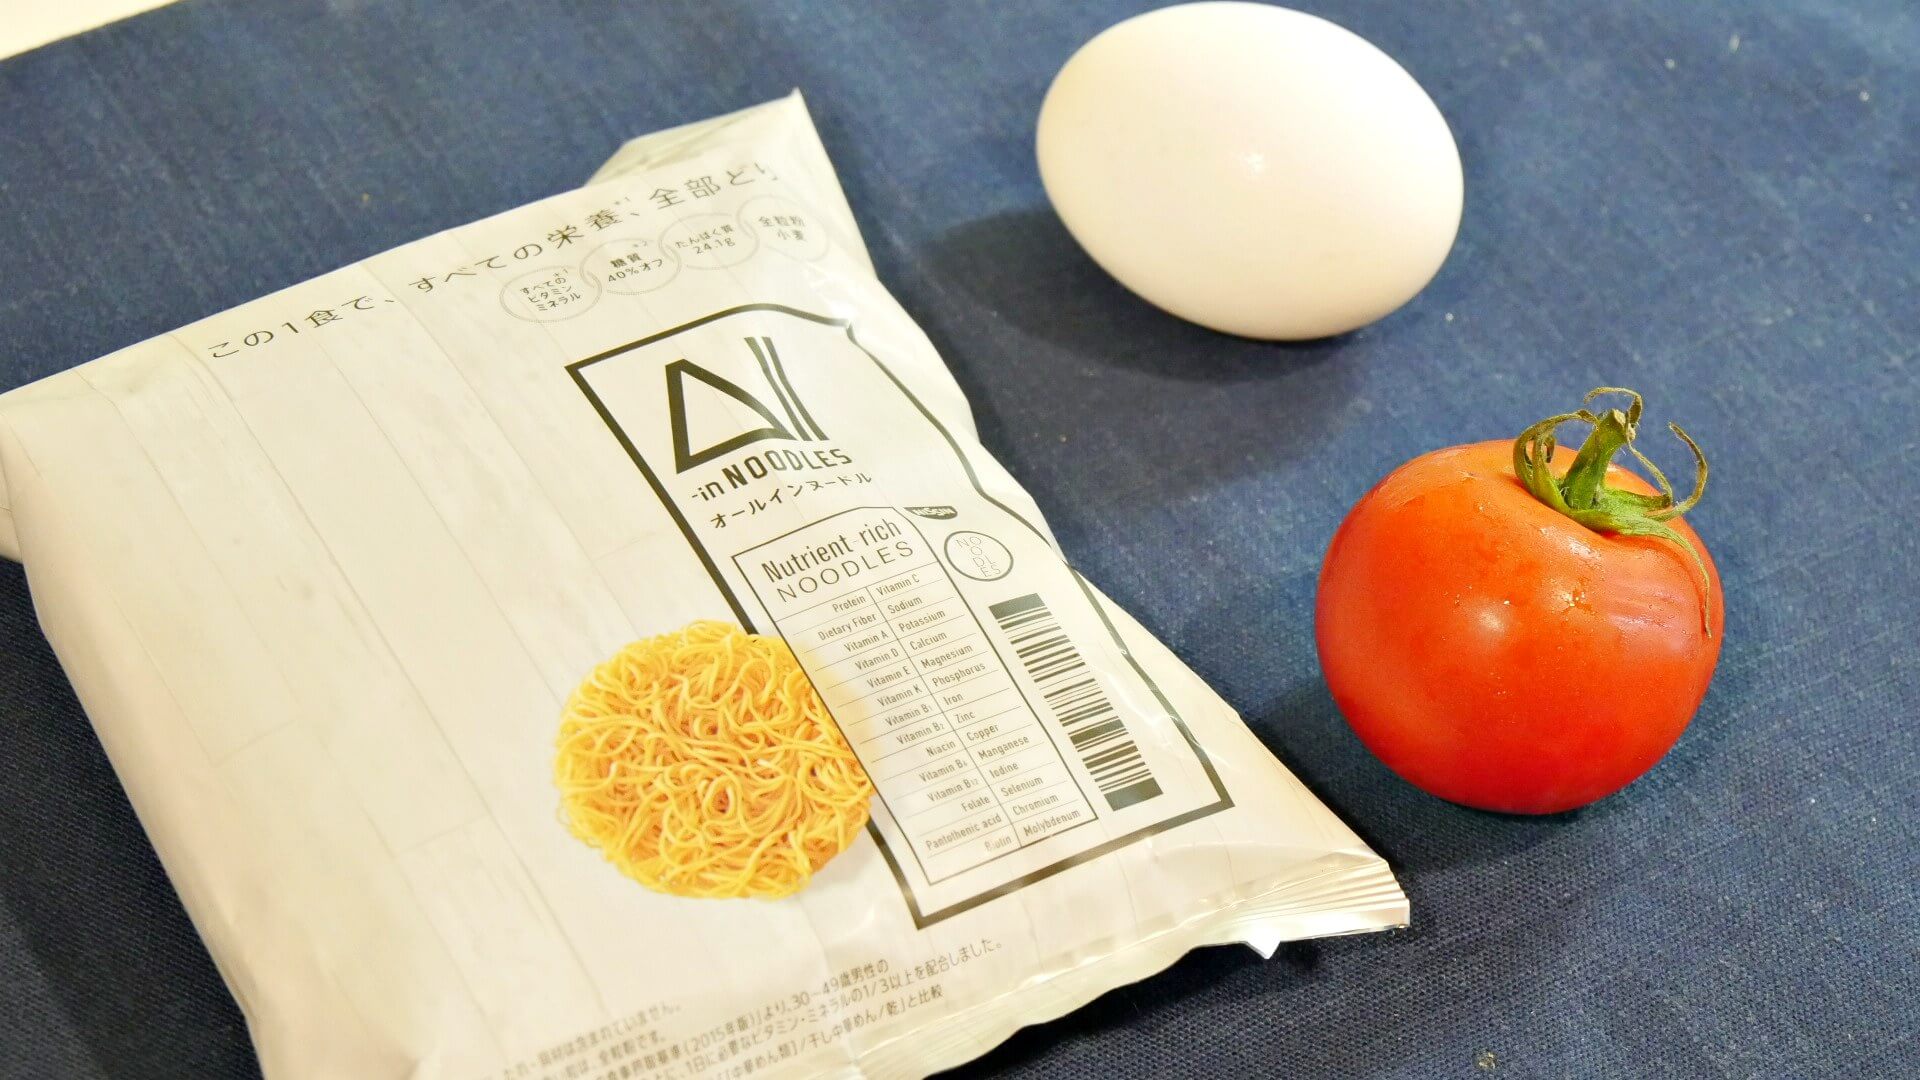 All-in NOODLES (オールインヌードル)